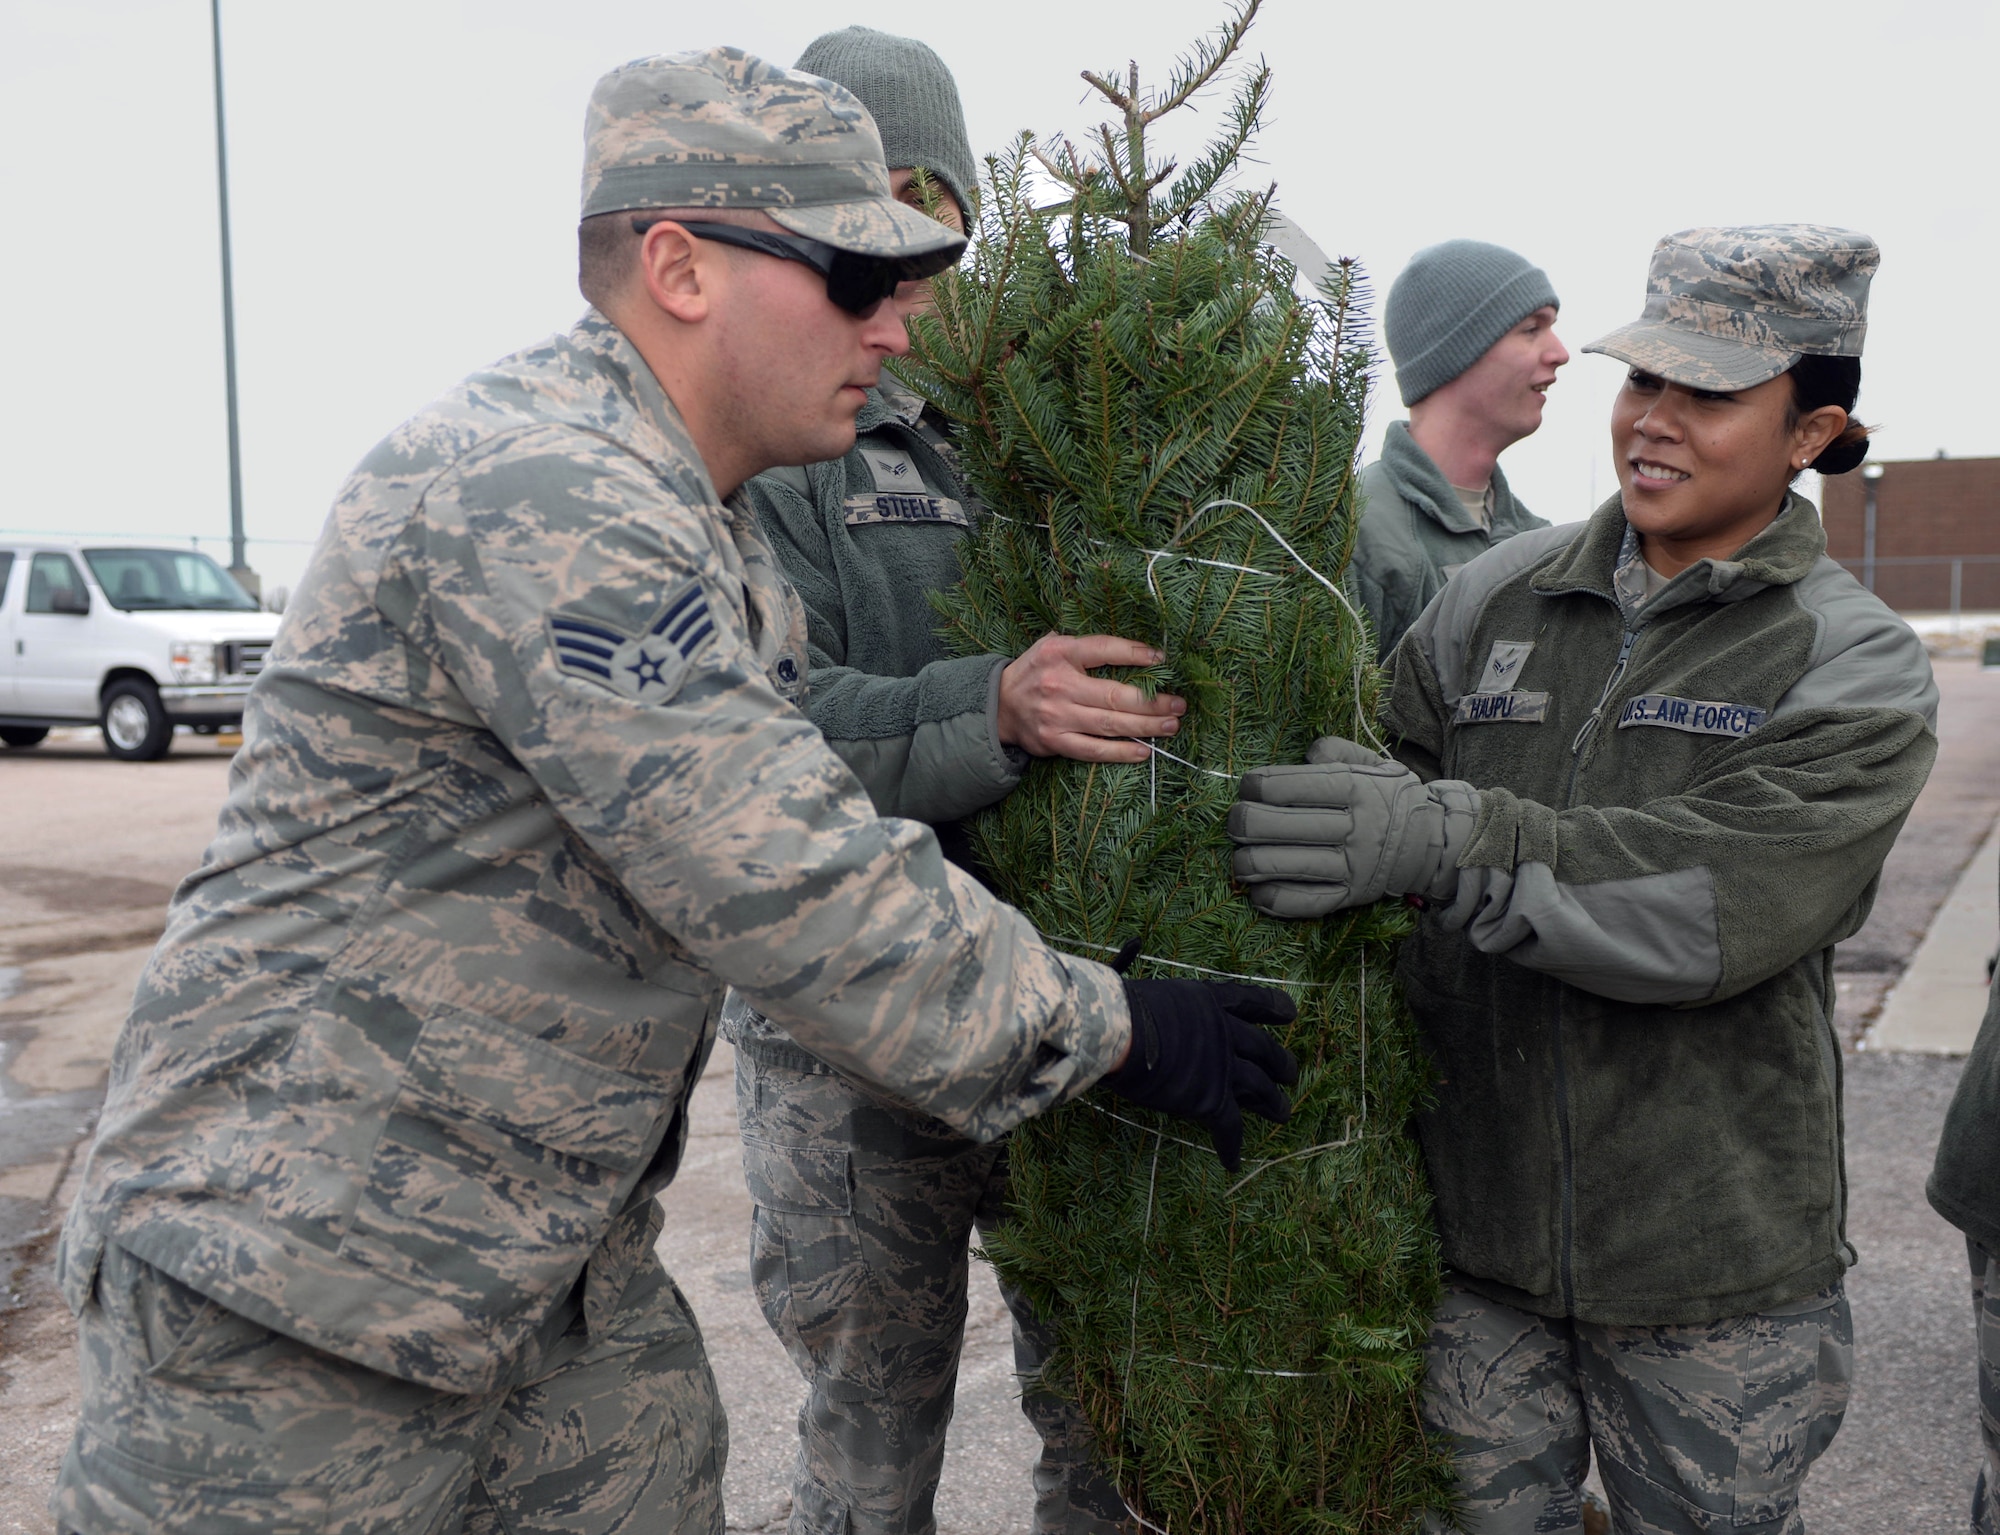 Airman 1st Class Holly Haupu, a lodging apprentice assigned to the 28th Force Support Squadron, passes a Christmas tree down a line during Ellsworth’s ninth annual Trees for Troops event outside the Outdoor Recreation Center at Ellsworth Air Force Base, S.D., Dec. 2, 2016. This national program started with a simple idea of tree farmers wanting to find a way to give back to our nation’s military service members. (U.S. Air Force photo by Airman 1st Class Denise M. Jenson)